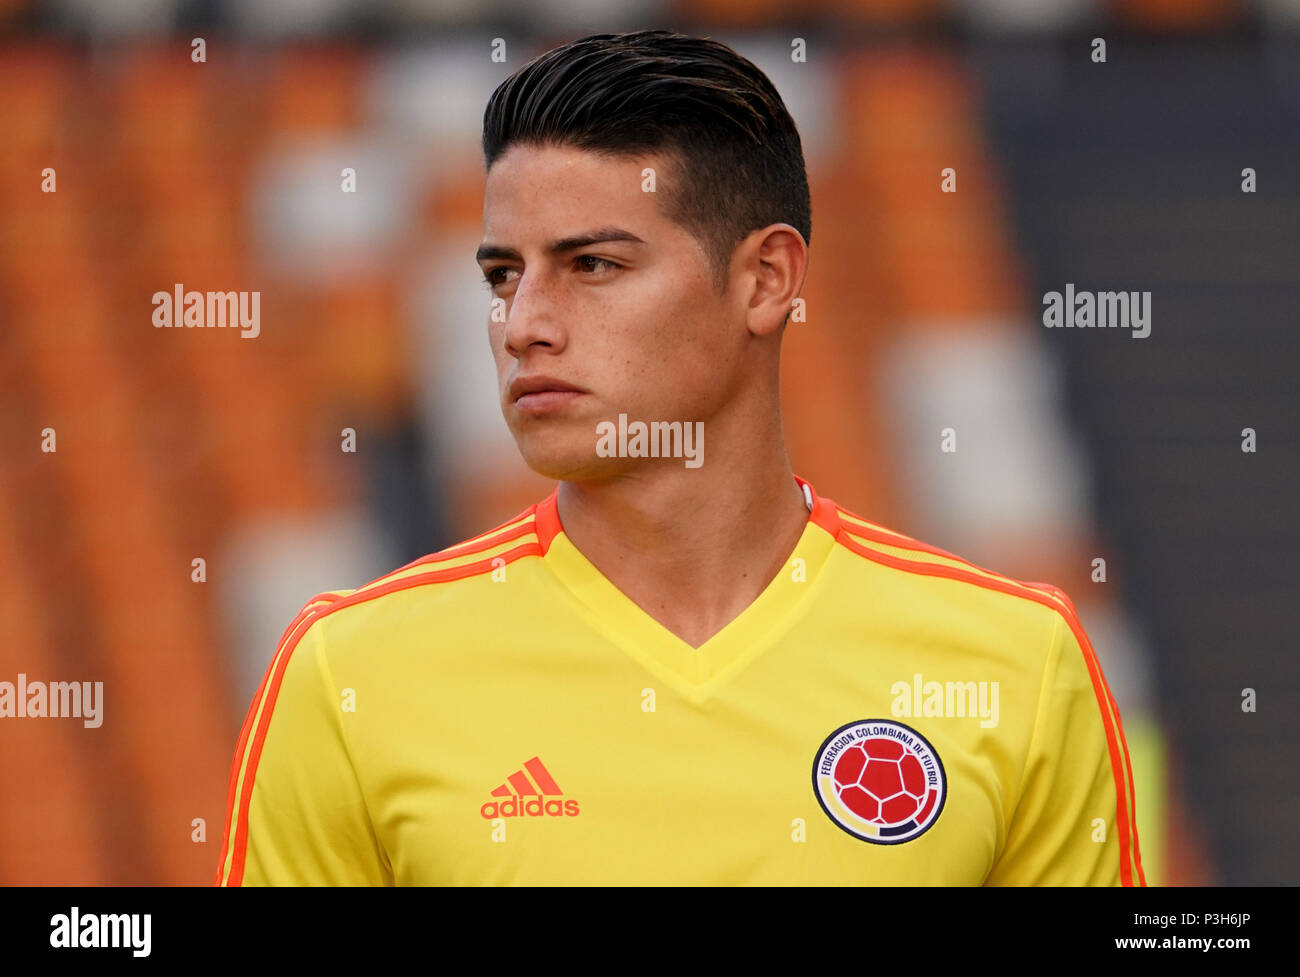 (180618) -- SARANSK, June 18, 2018(Xinhua) -- Colombia's James Rodriguez is seen during a training session prior to a group H match against Japan at the 2018 FIFA World Cup in Saransk, Russia, on June 18, 2018. (Xinhua/Lui Siu Wai) Stock Photo